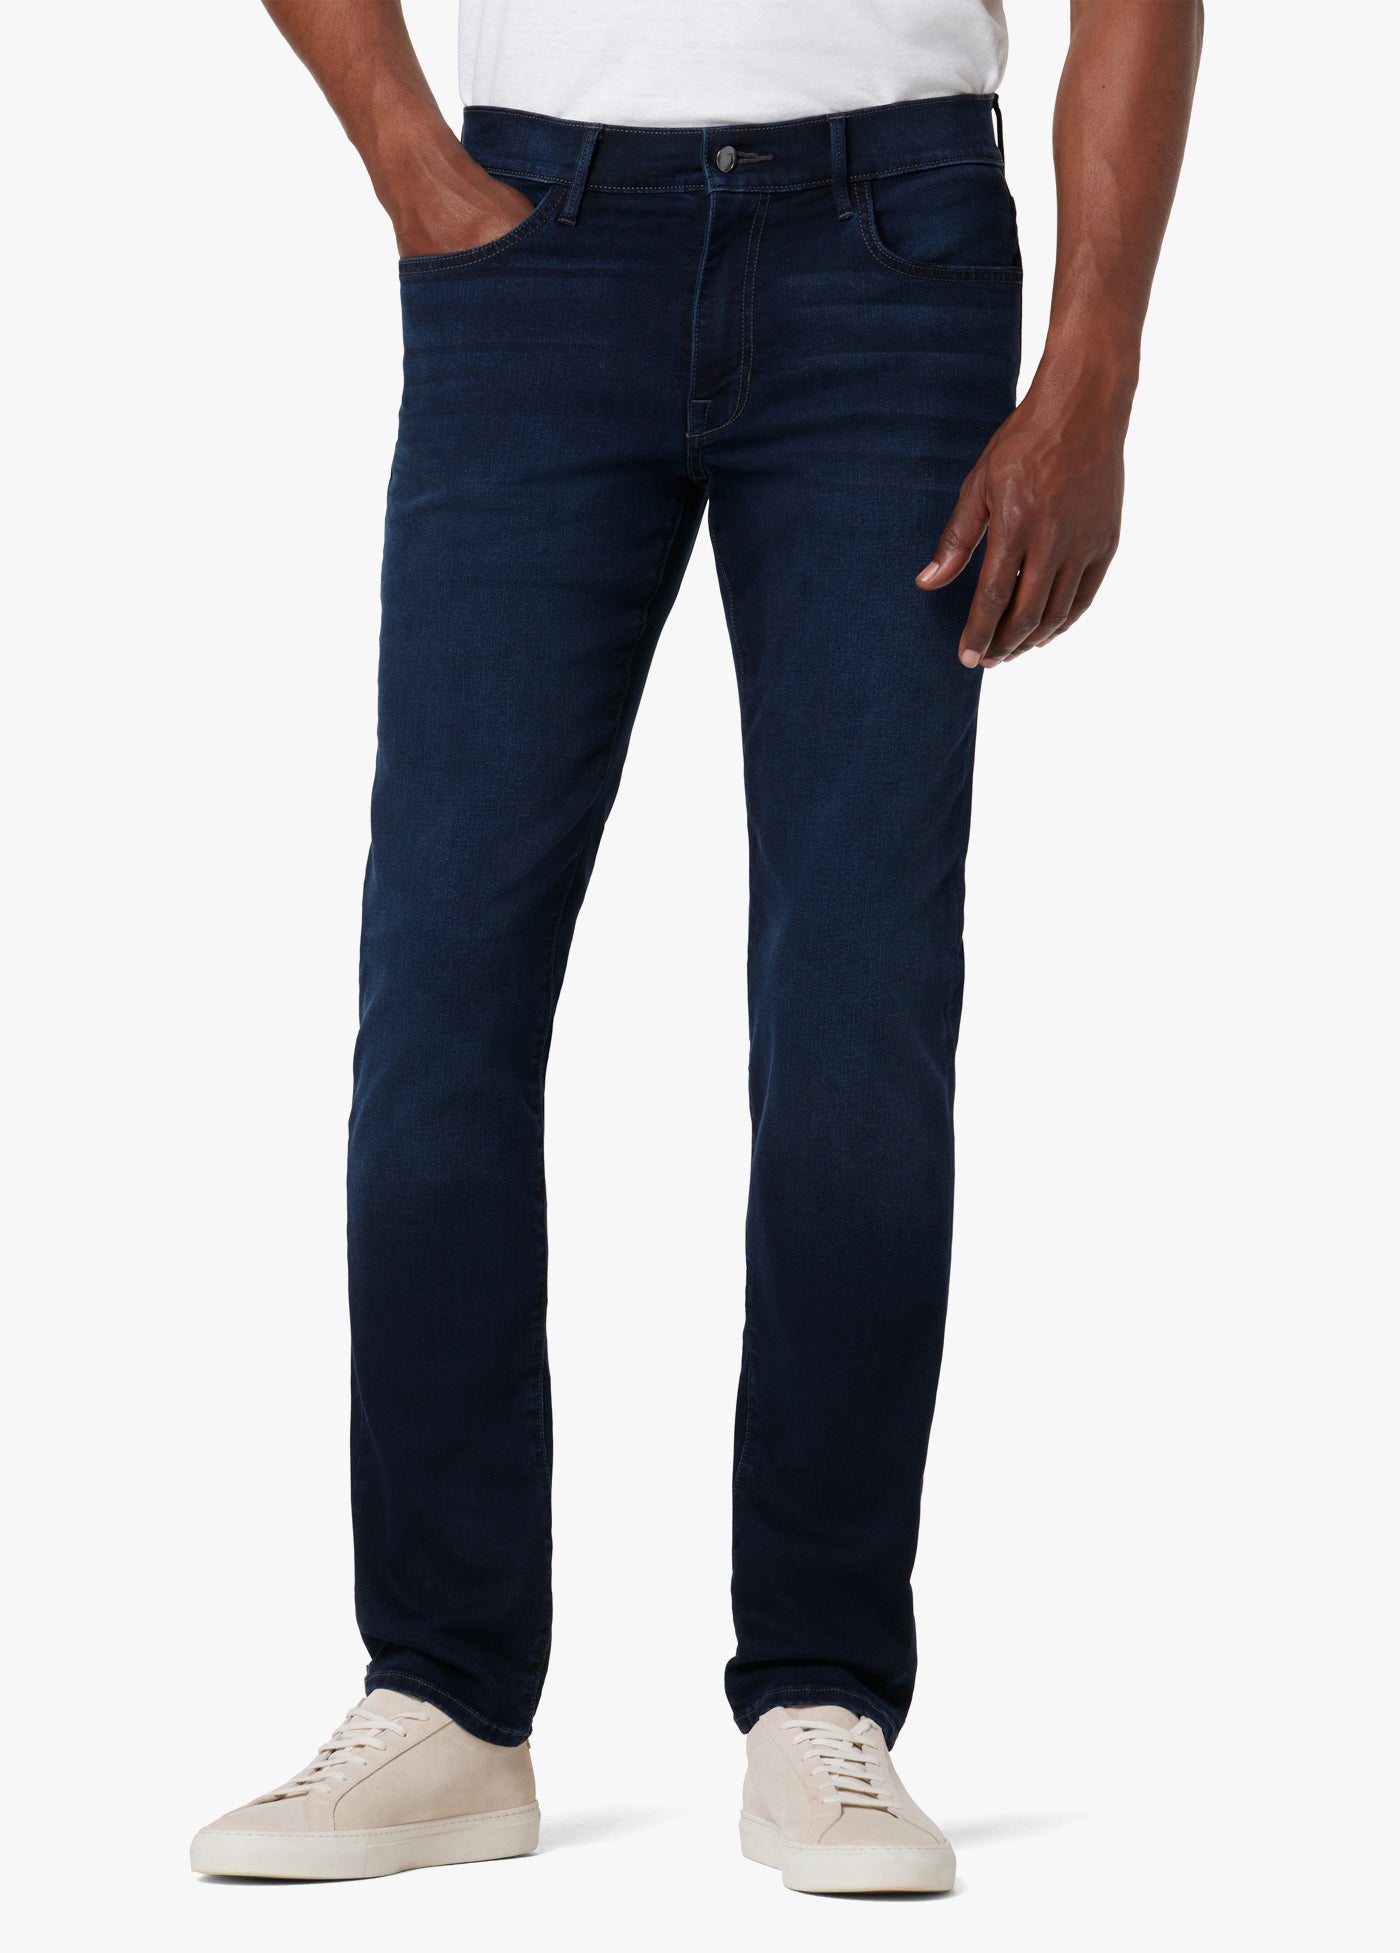 THE ASHER – Joe's® Jeans